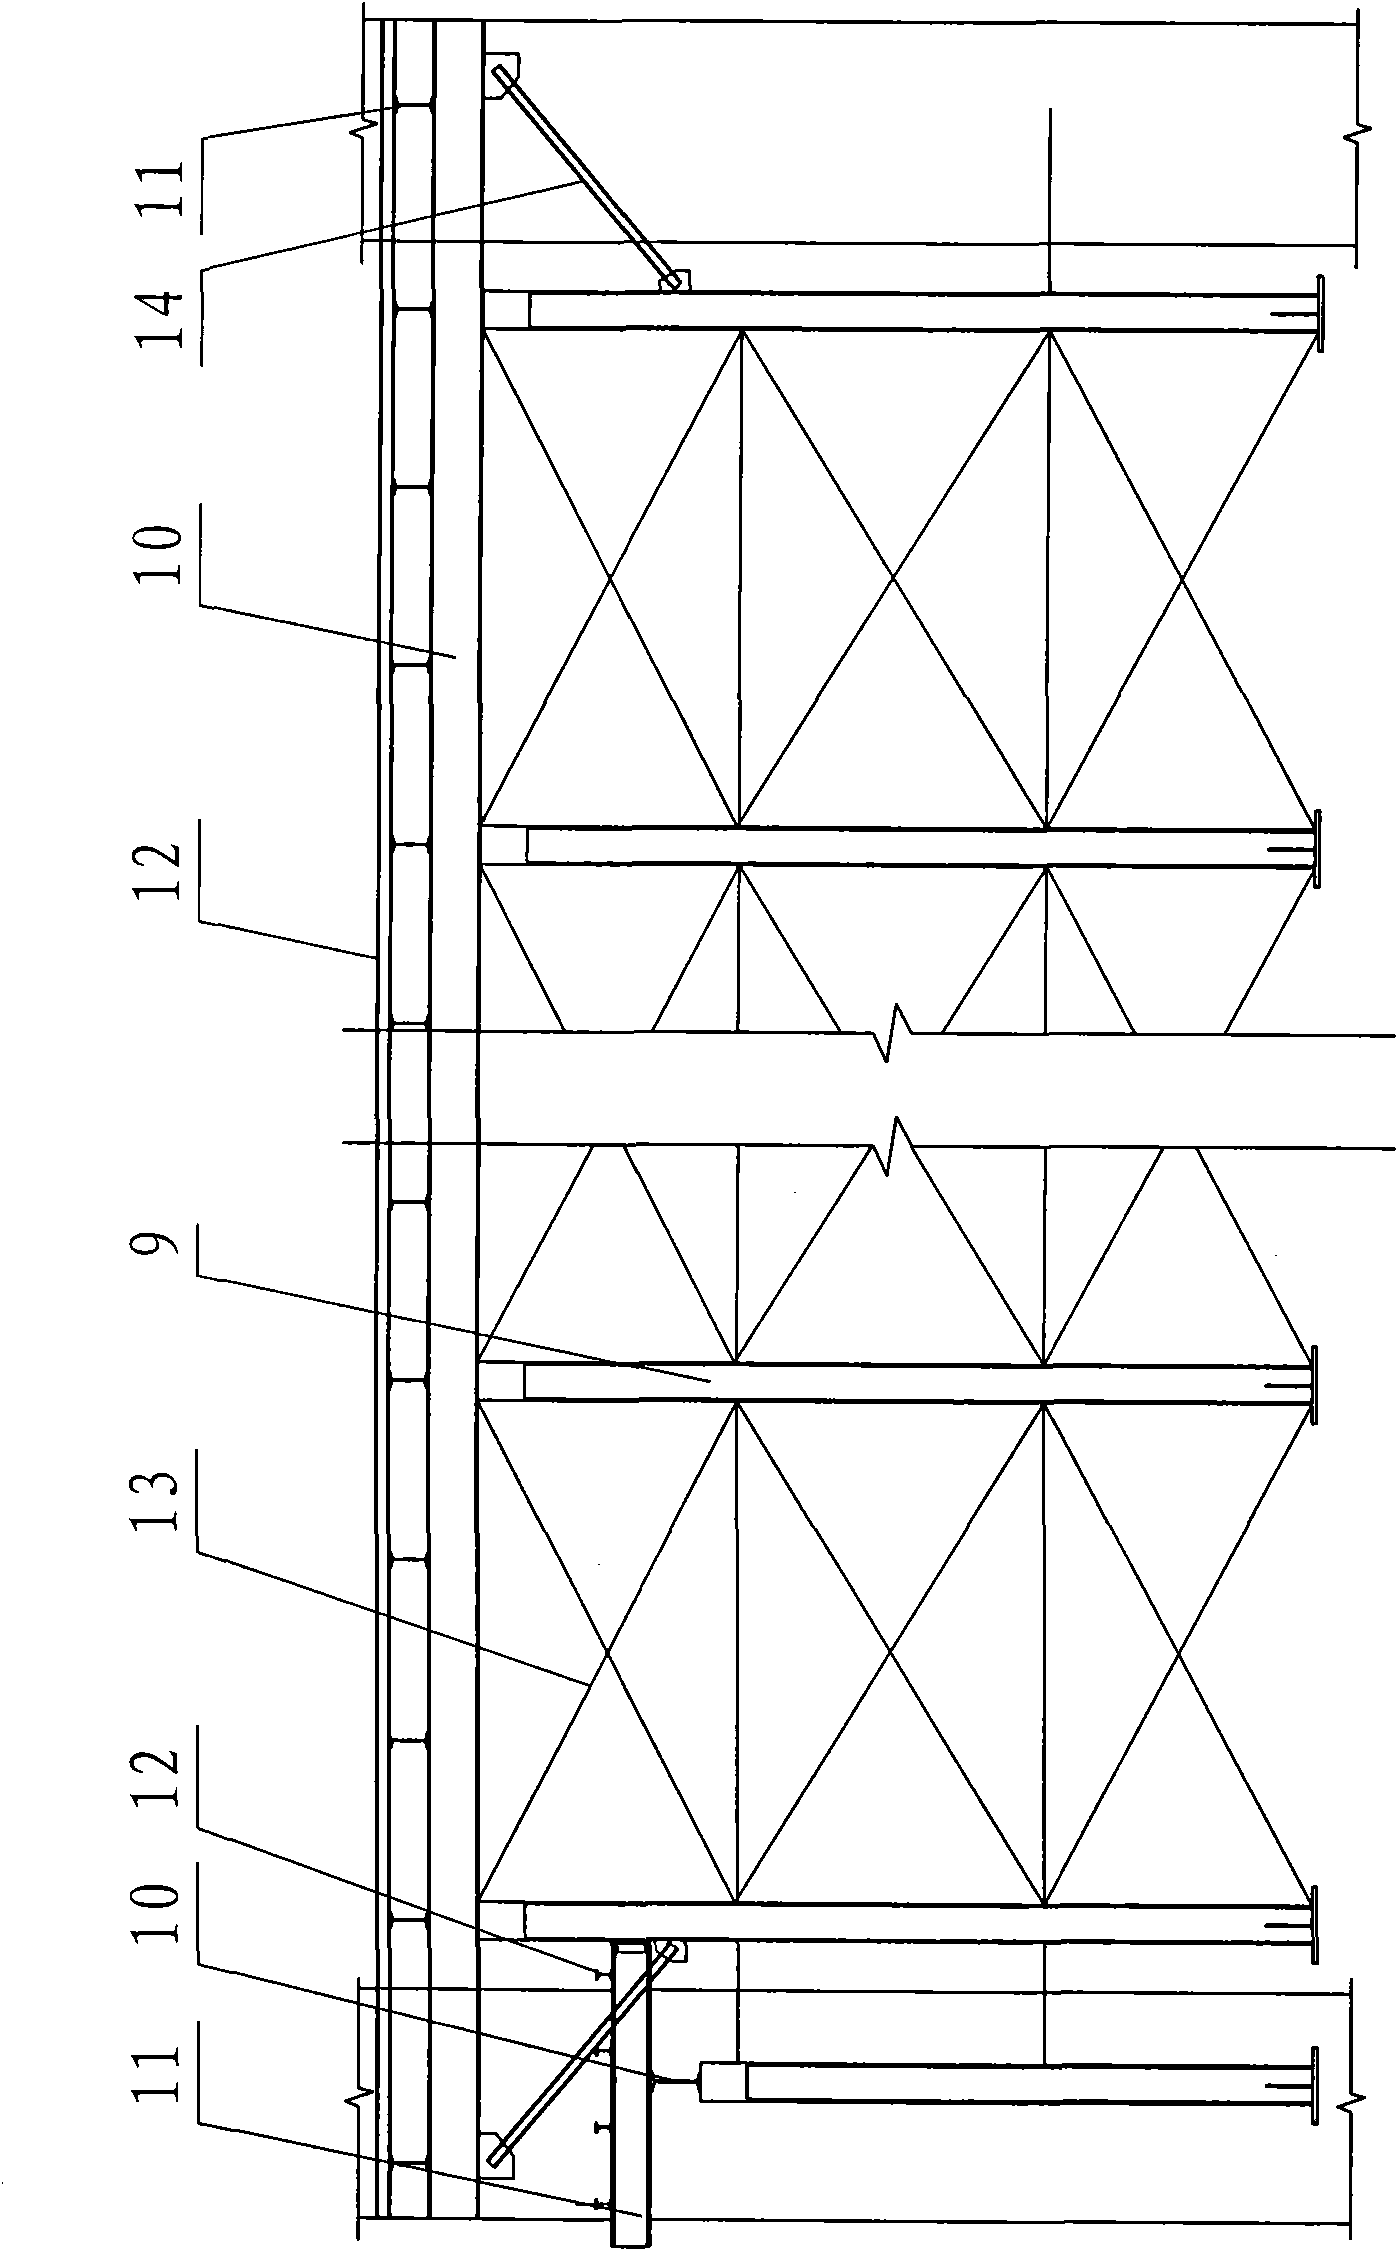 Construction method for support structure of coal tower template for tamping type coke oven